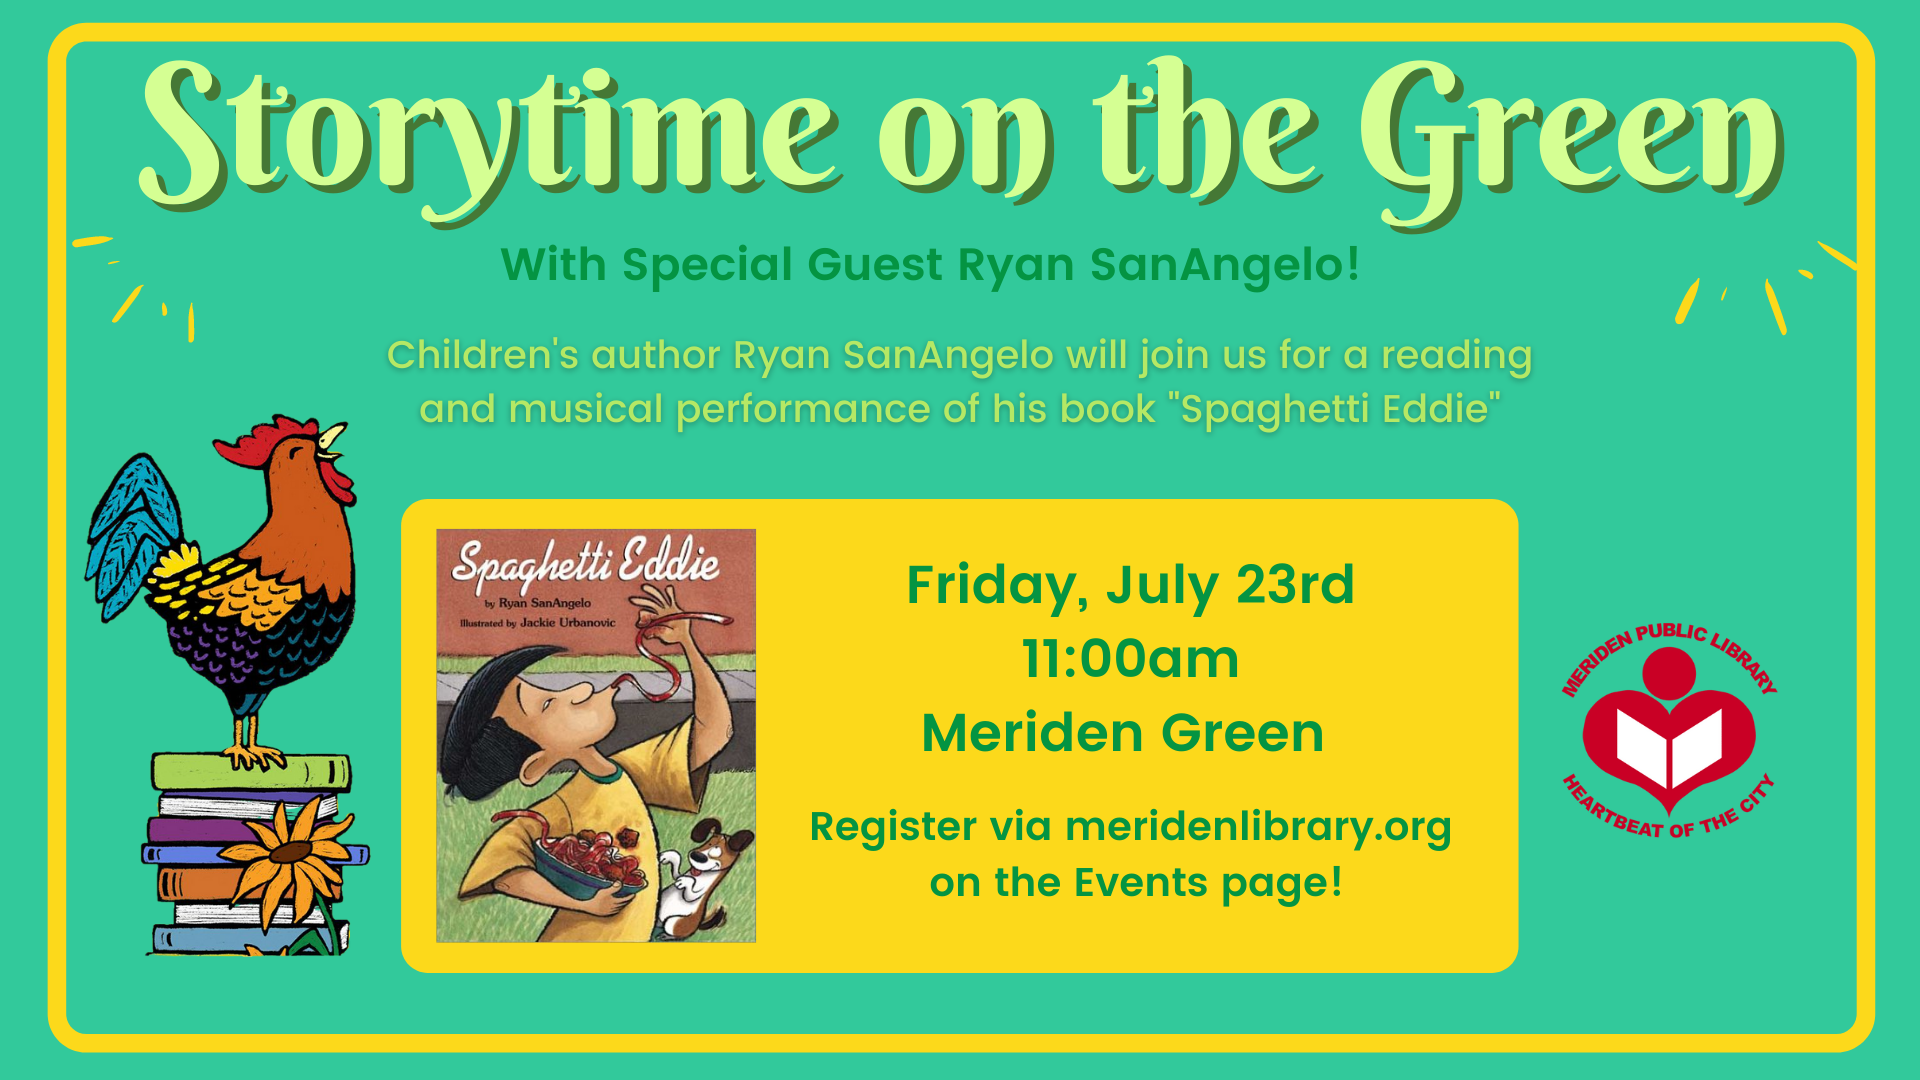 Storytime on the Green with Special Guest Ryan SanAngelo